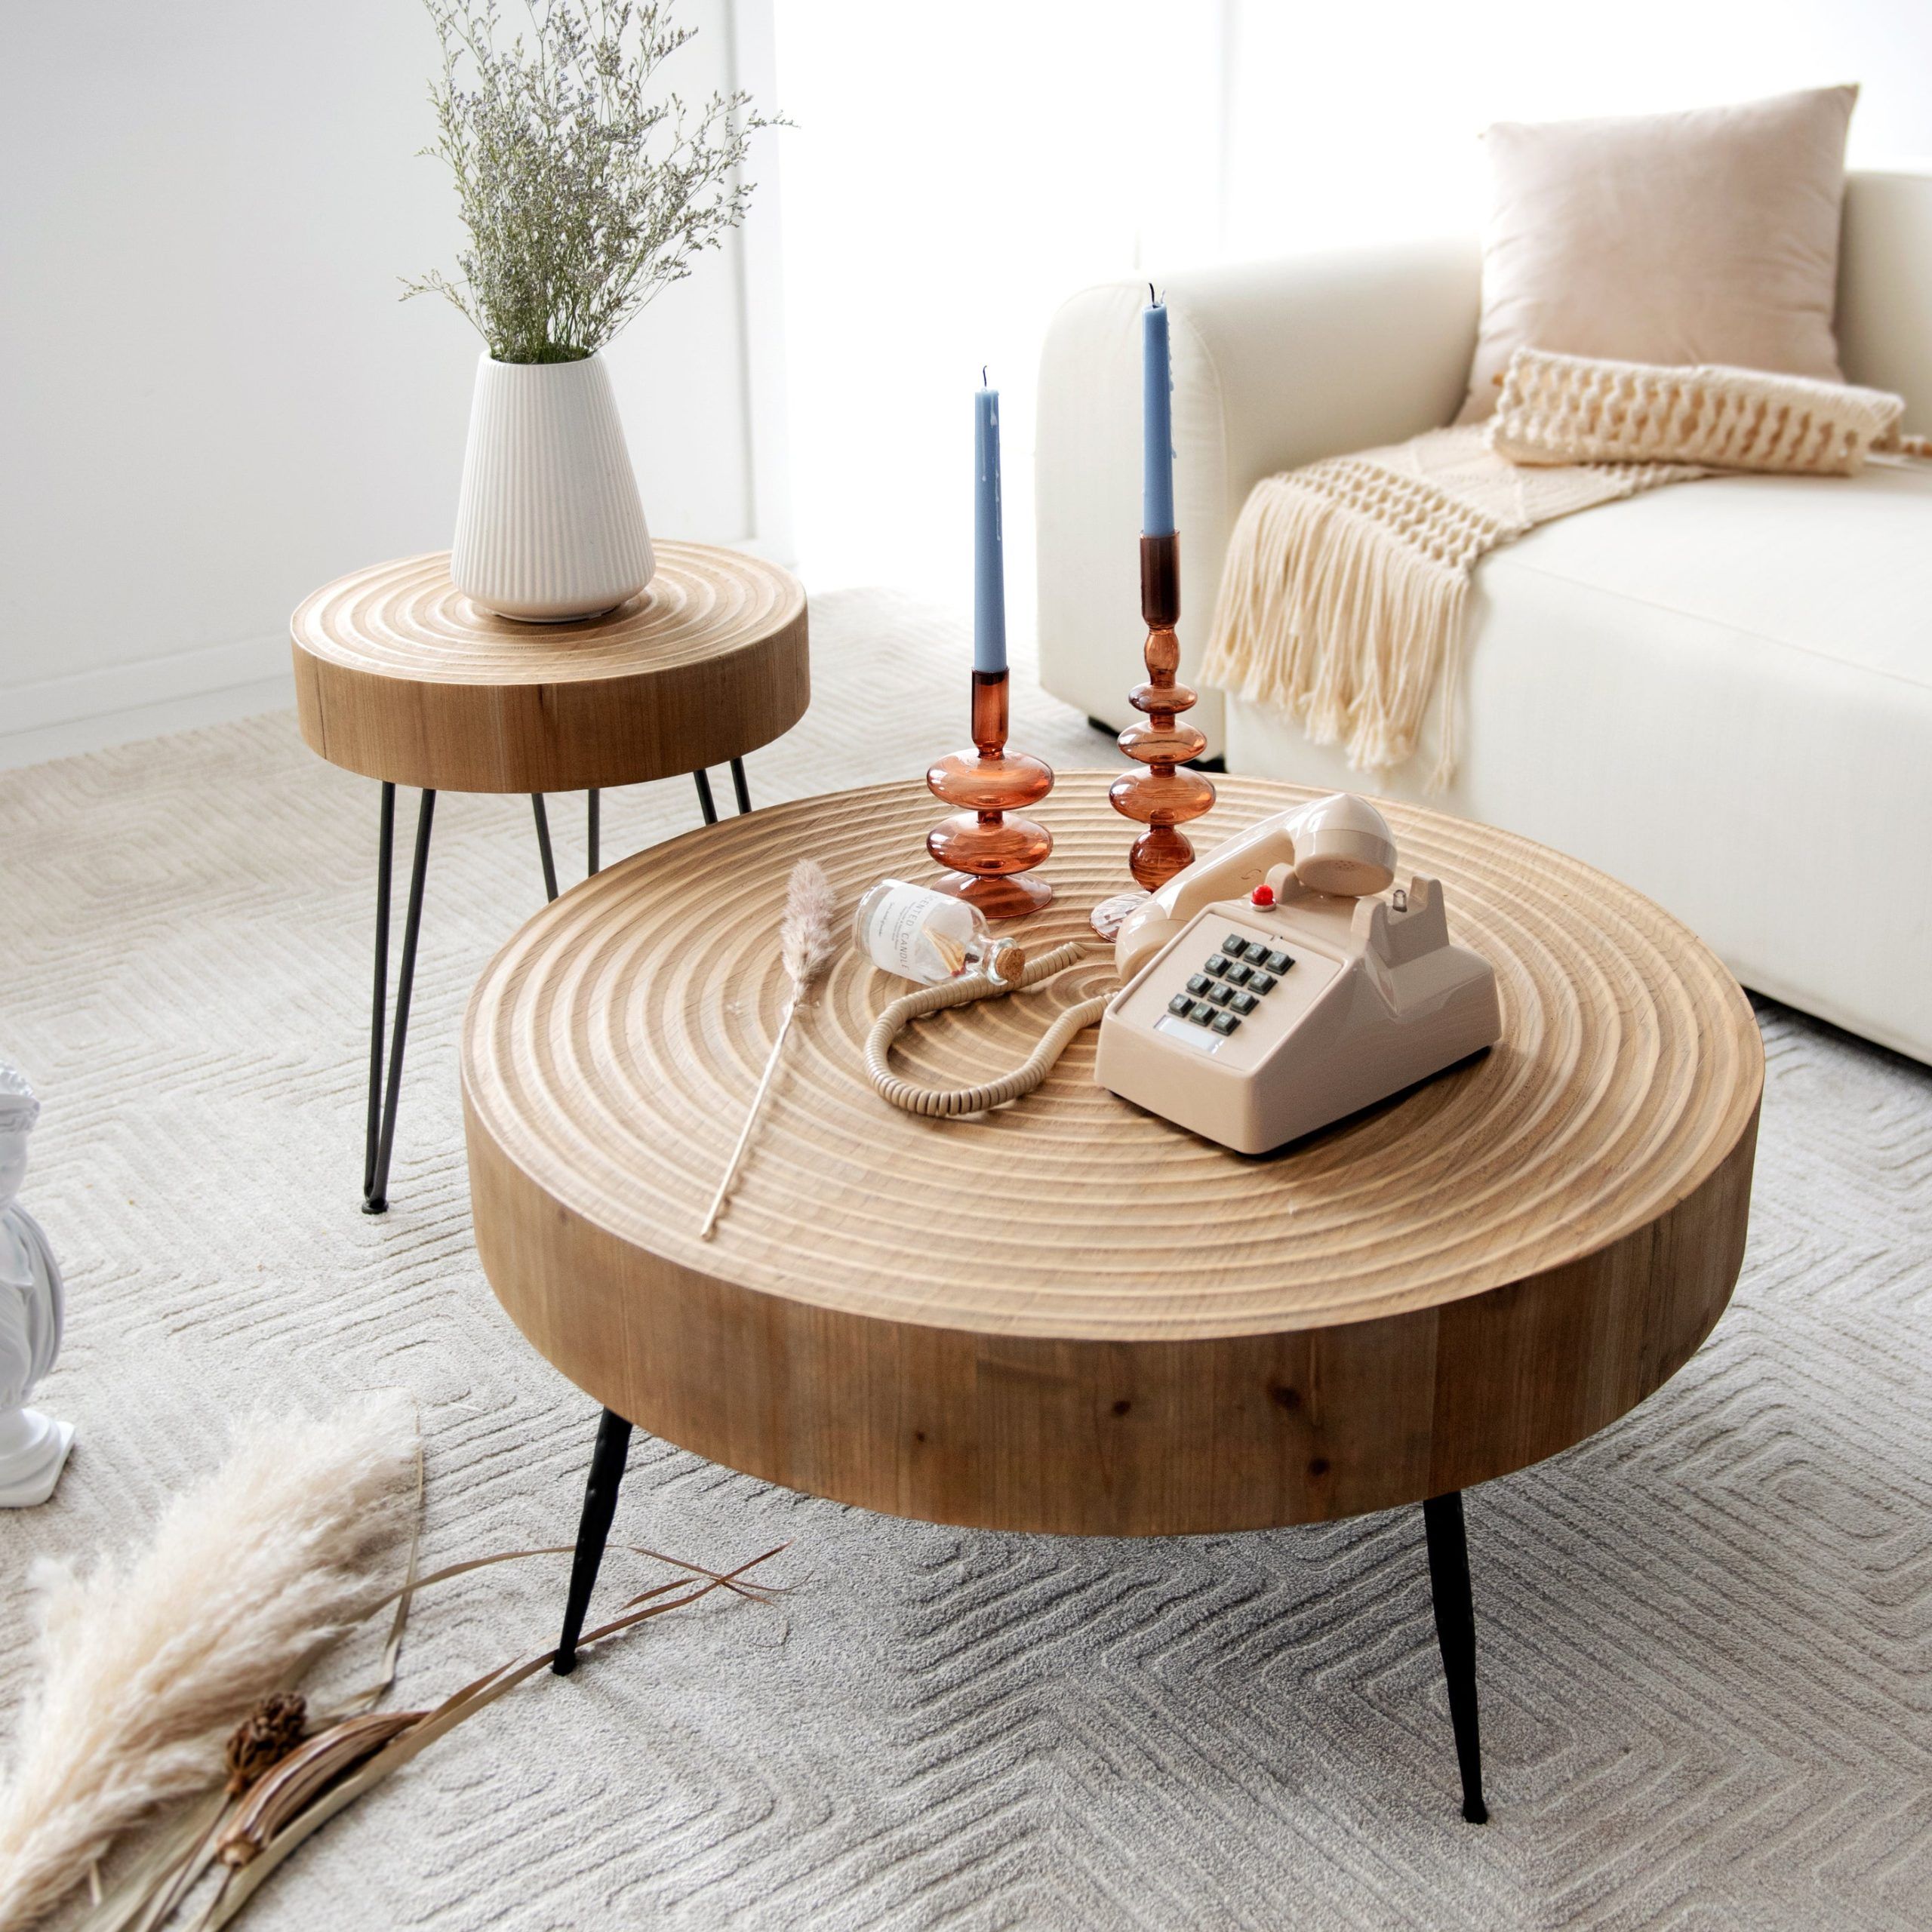 Cozayh 2 Piece Modern Farmhouse Living Room Coffee Table Set, Round Intended For Modern Farmhouse Coffee Table Sets (View 8 of 20)